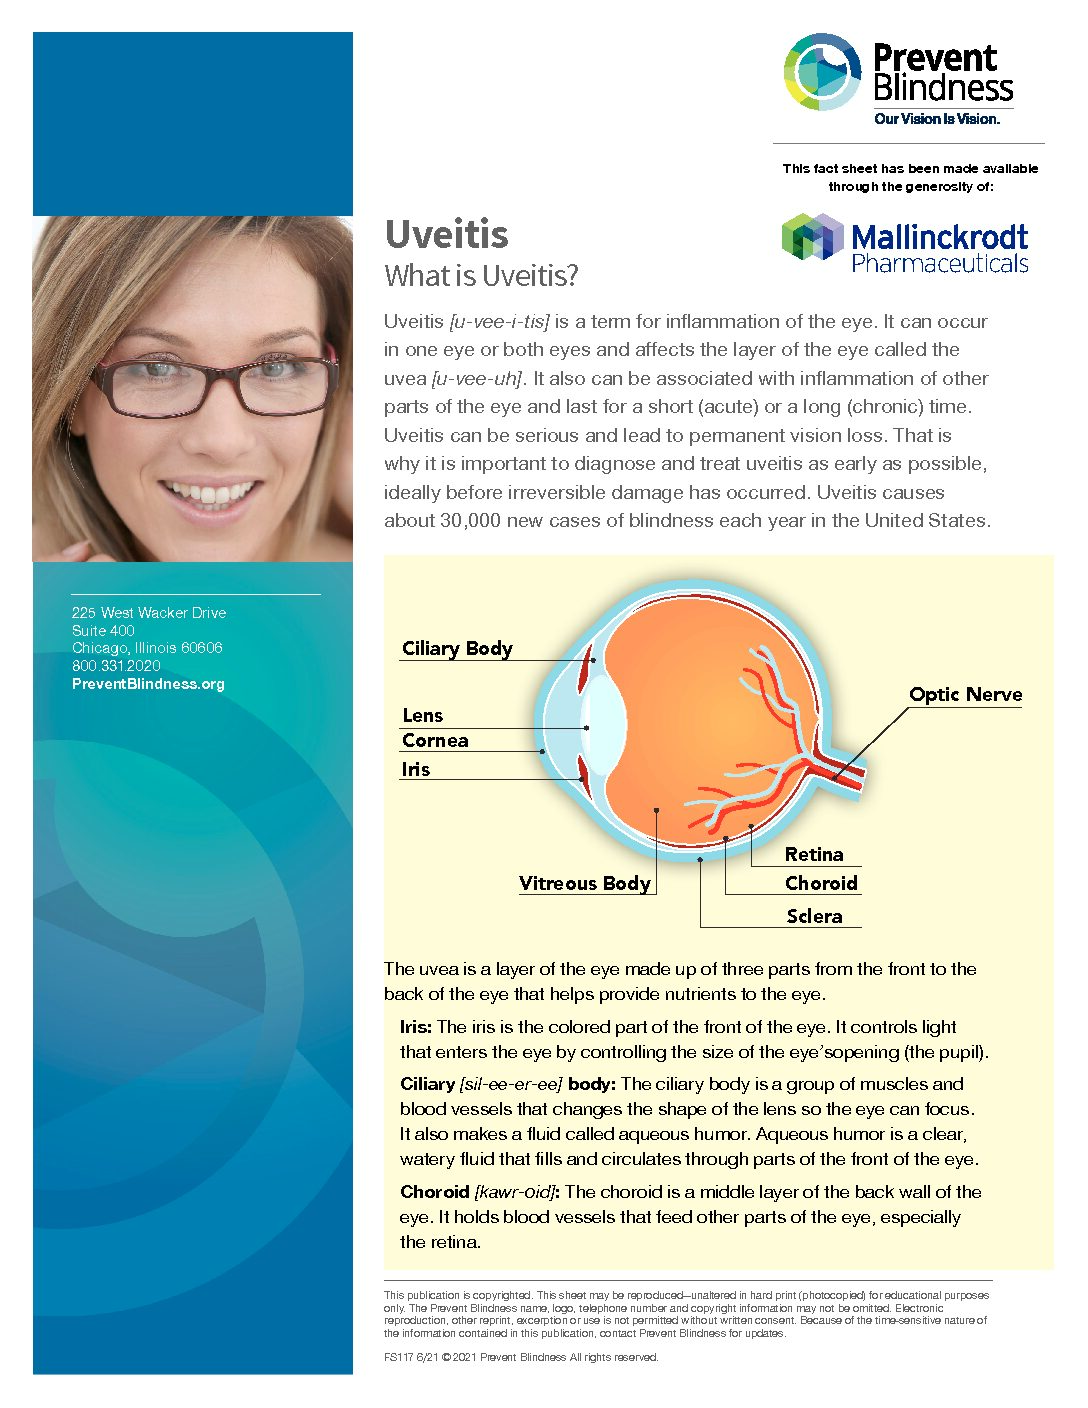 Uveitis Patient Guide